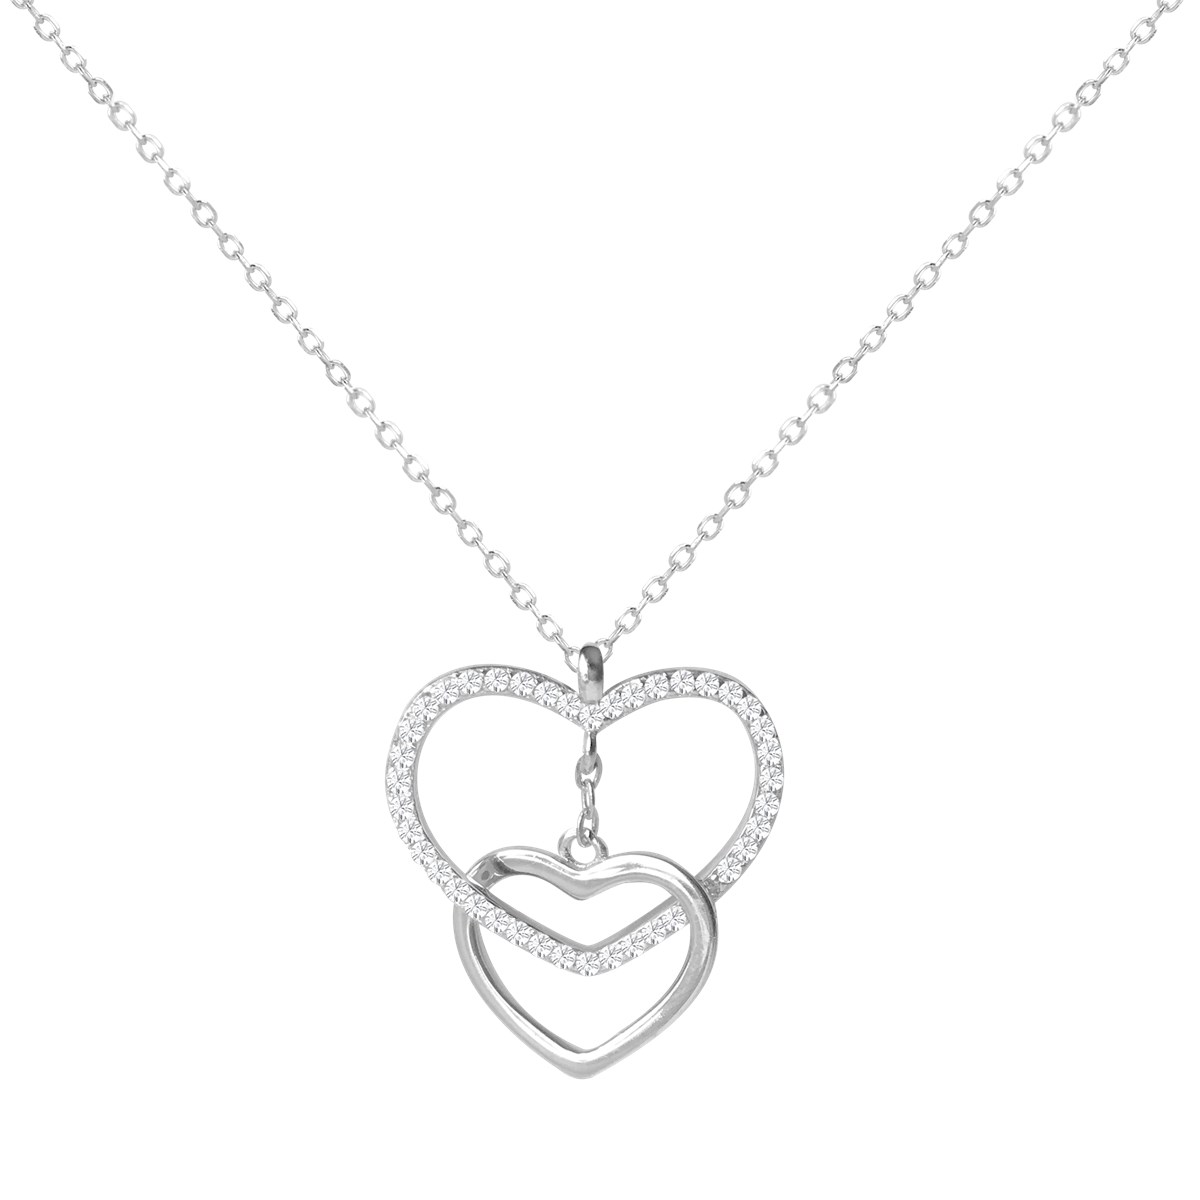 Collier argent 925 oxyde